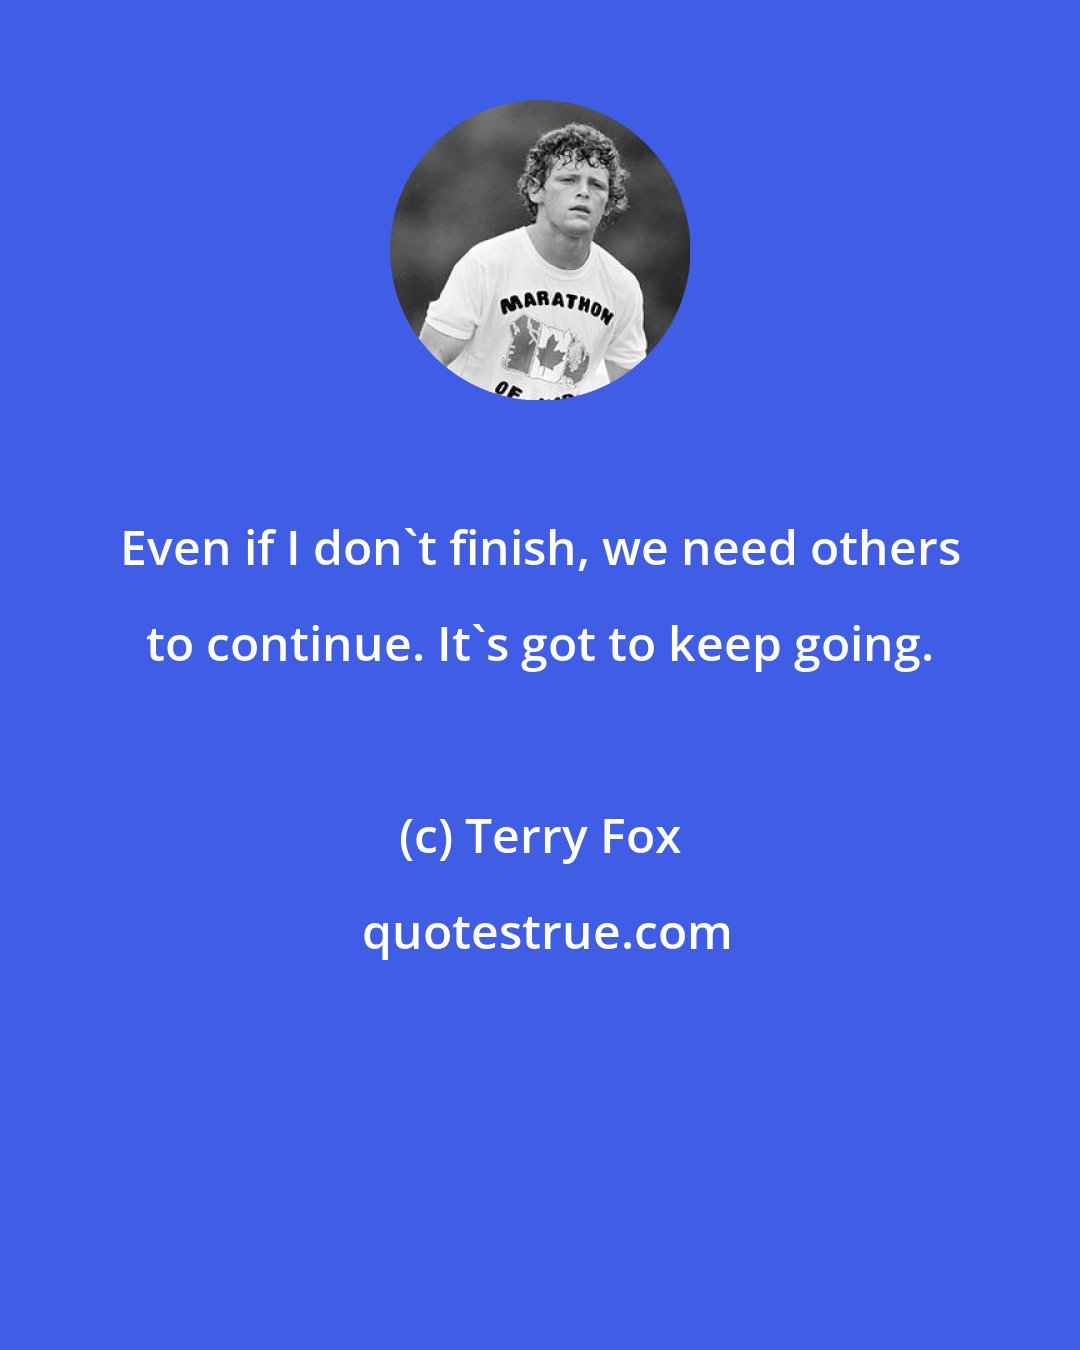 Terry Fox: Even if I don't finish, we need others to continue. It's got to keep going.